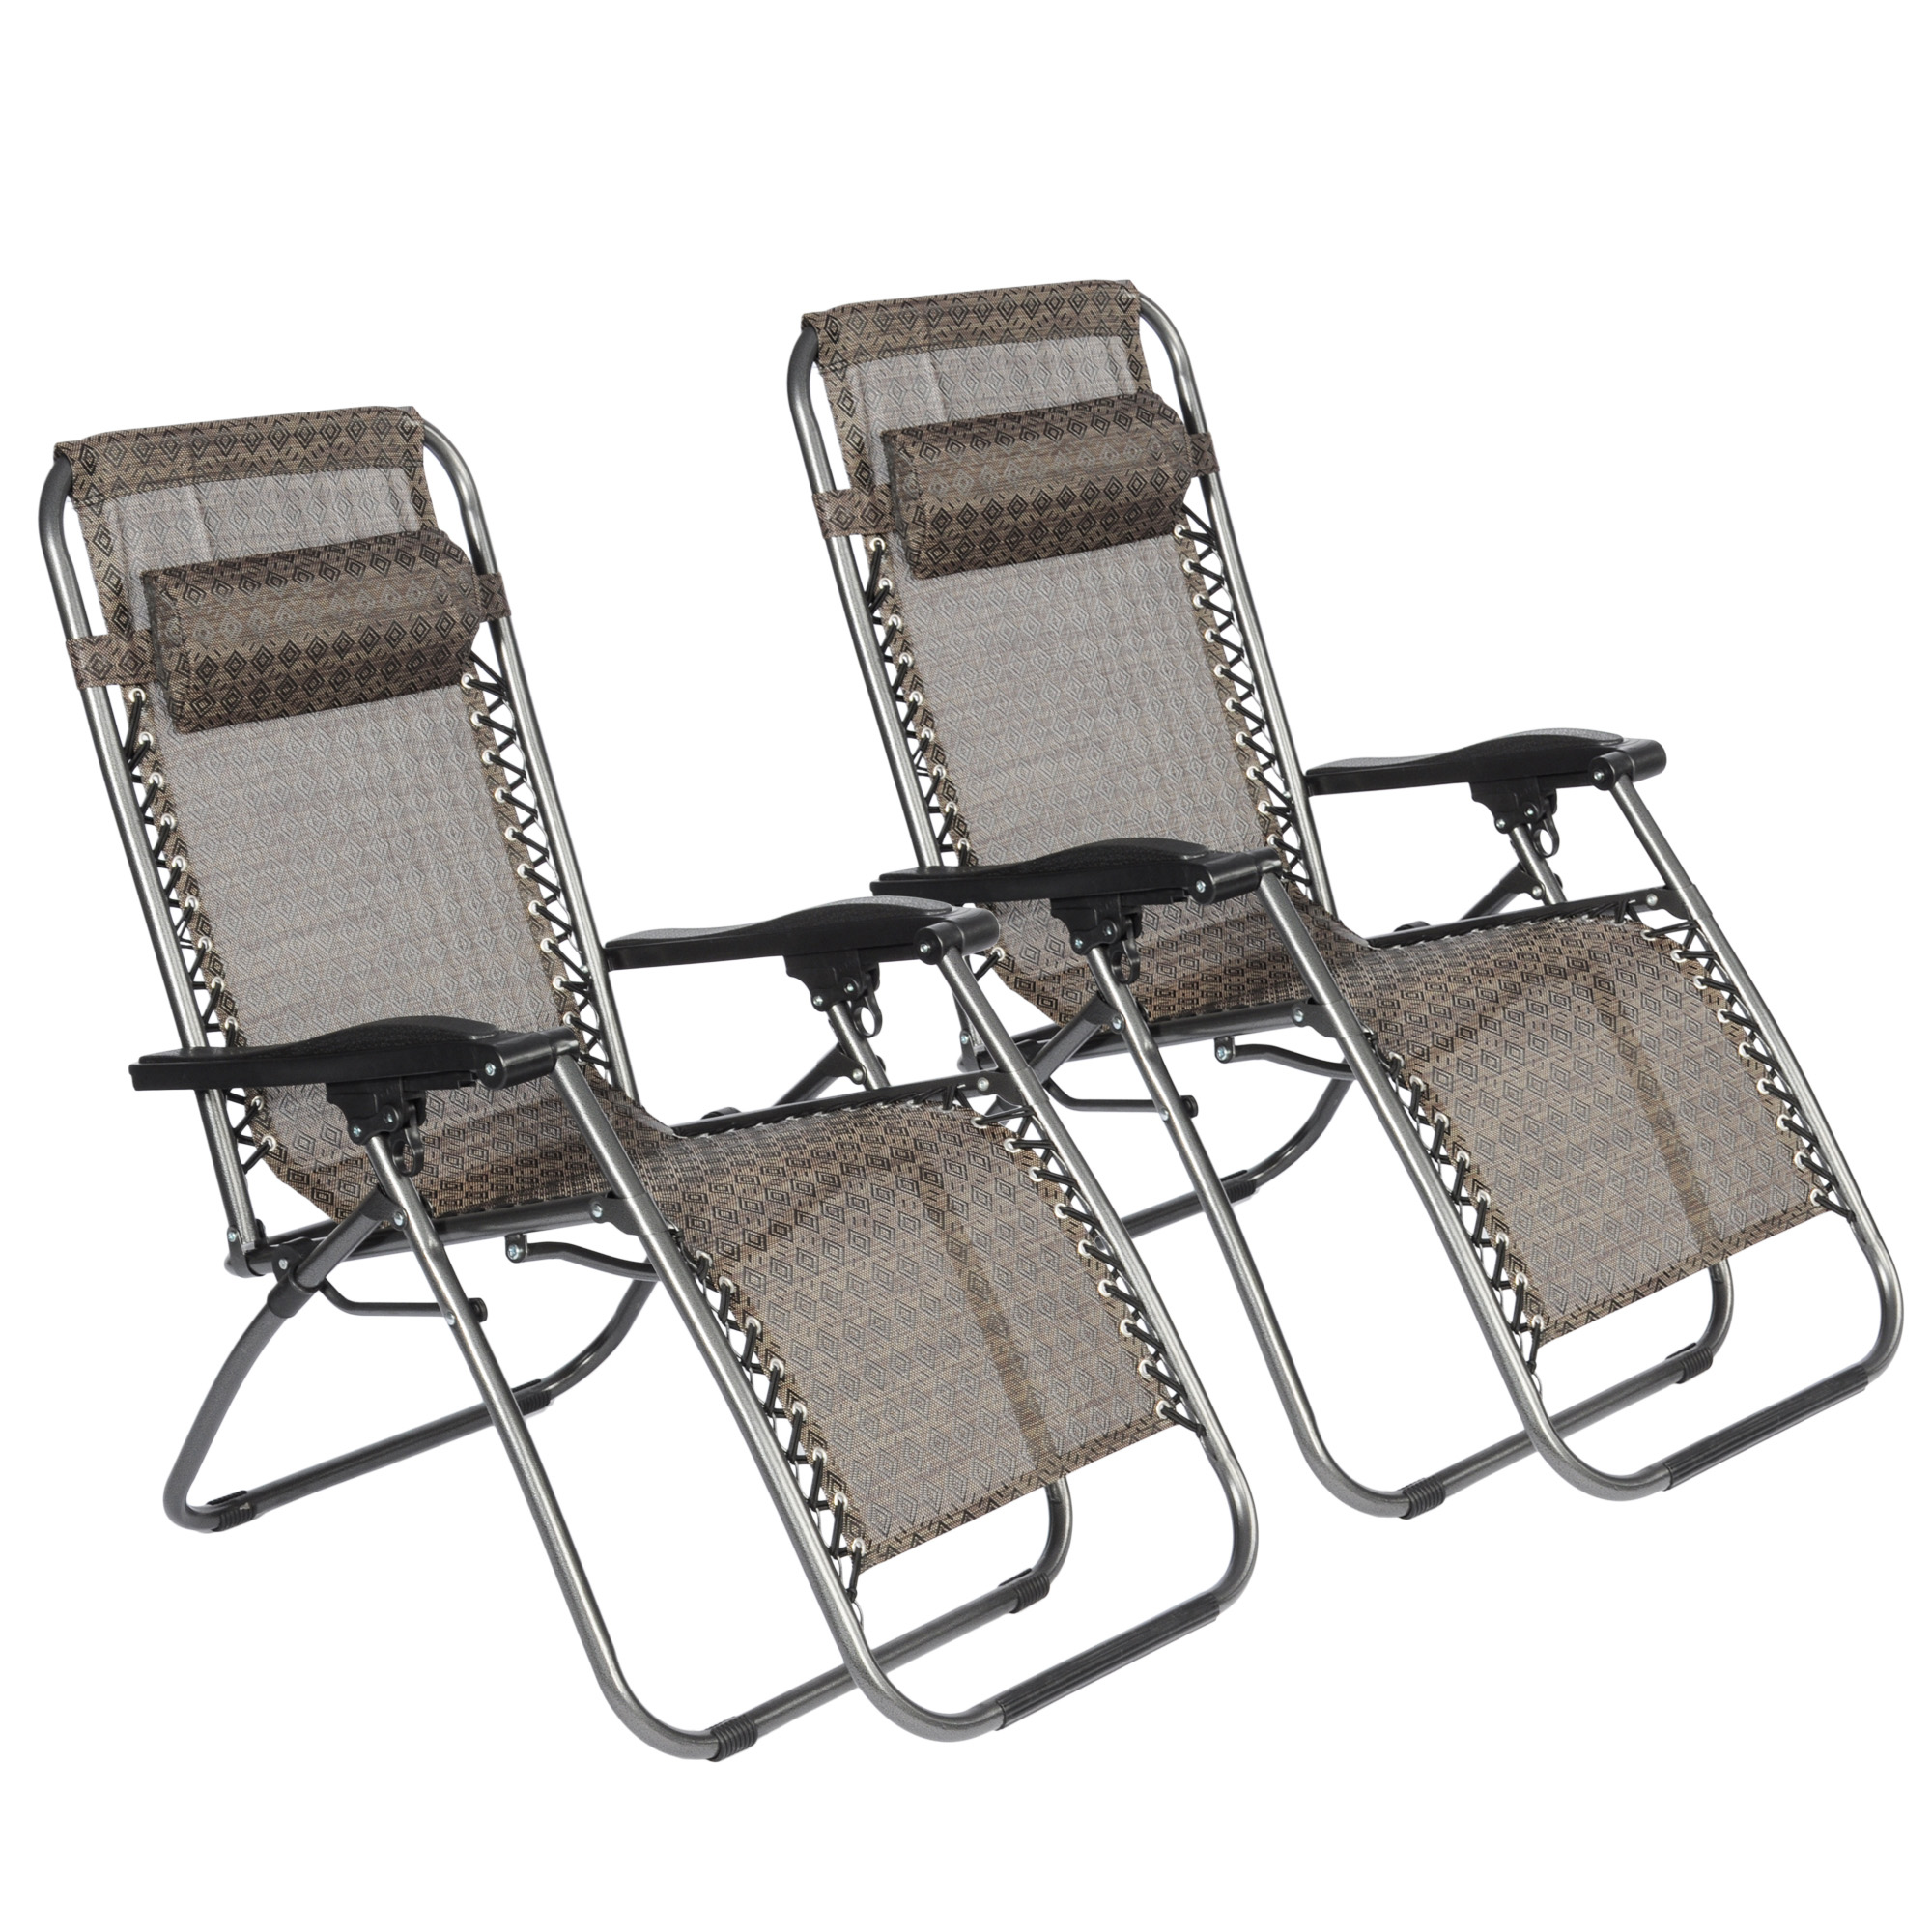 KARMAS PRODUCT 2-pack Zero Gravity Chair Chaise Lounge Chairs Folding Adjustable Recliners Outdoor Patio Lawn Pool Beach Chair, Support 300 Lbs - image 1 of 7